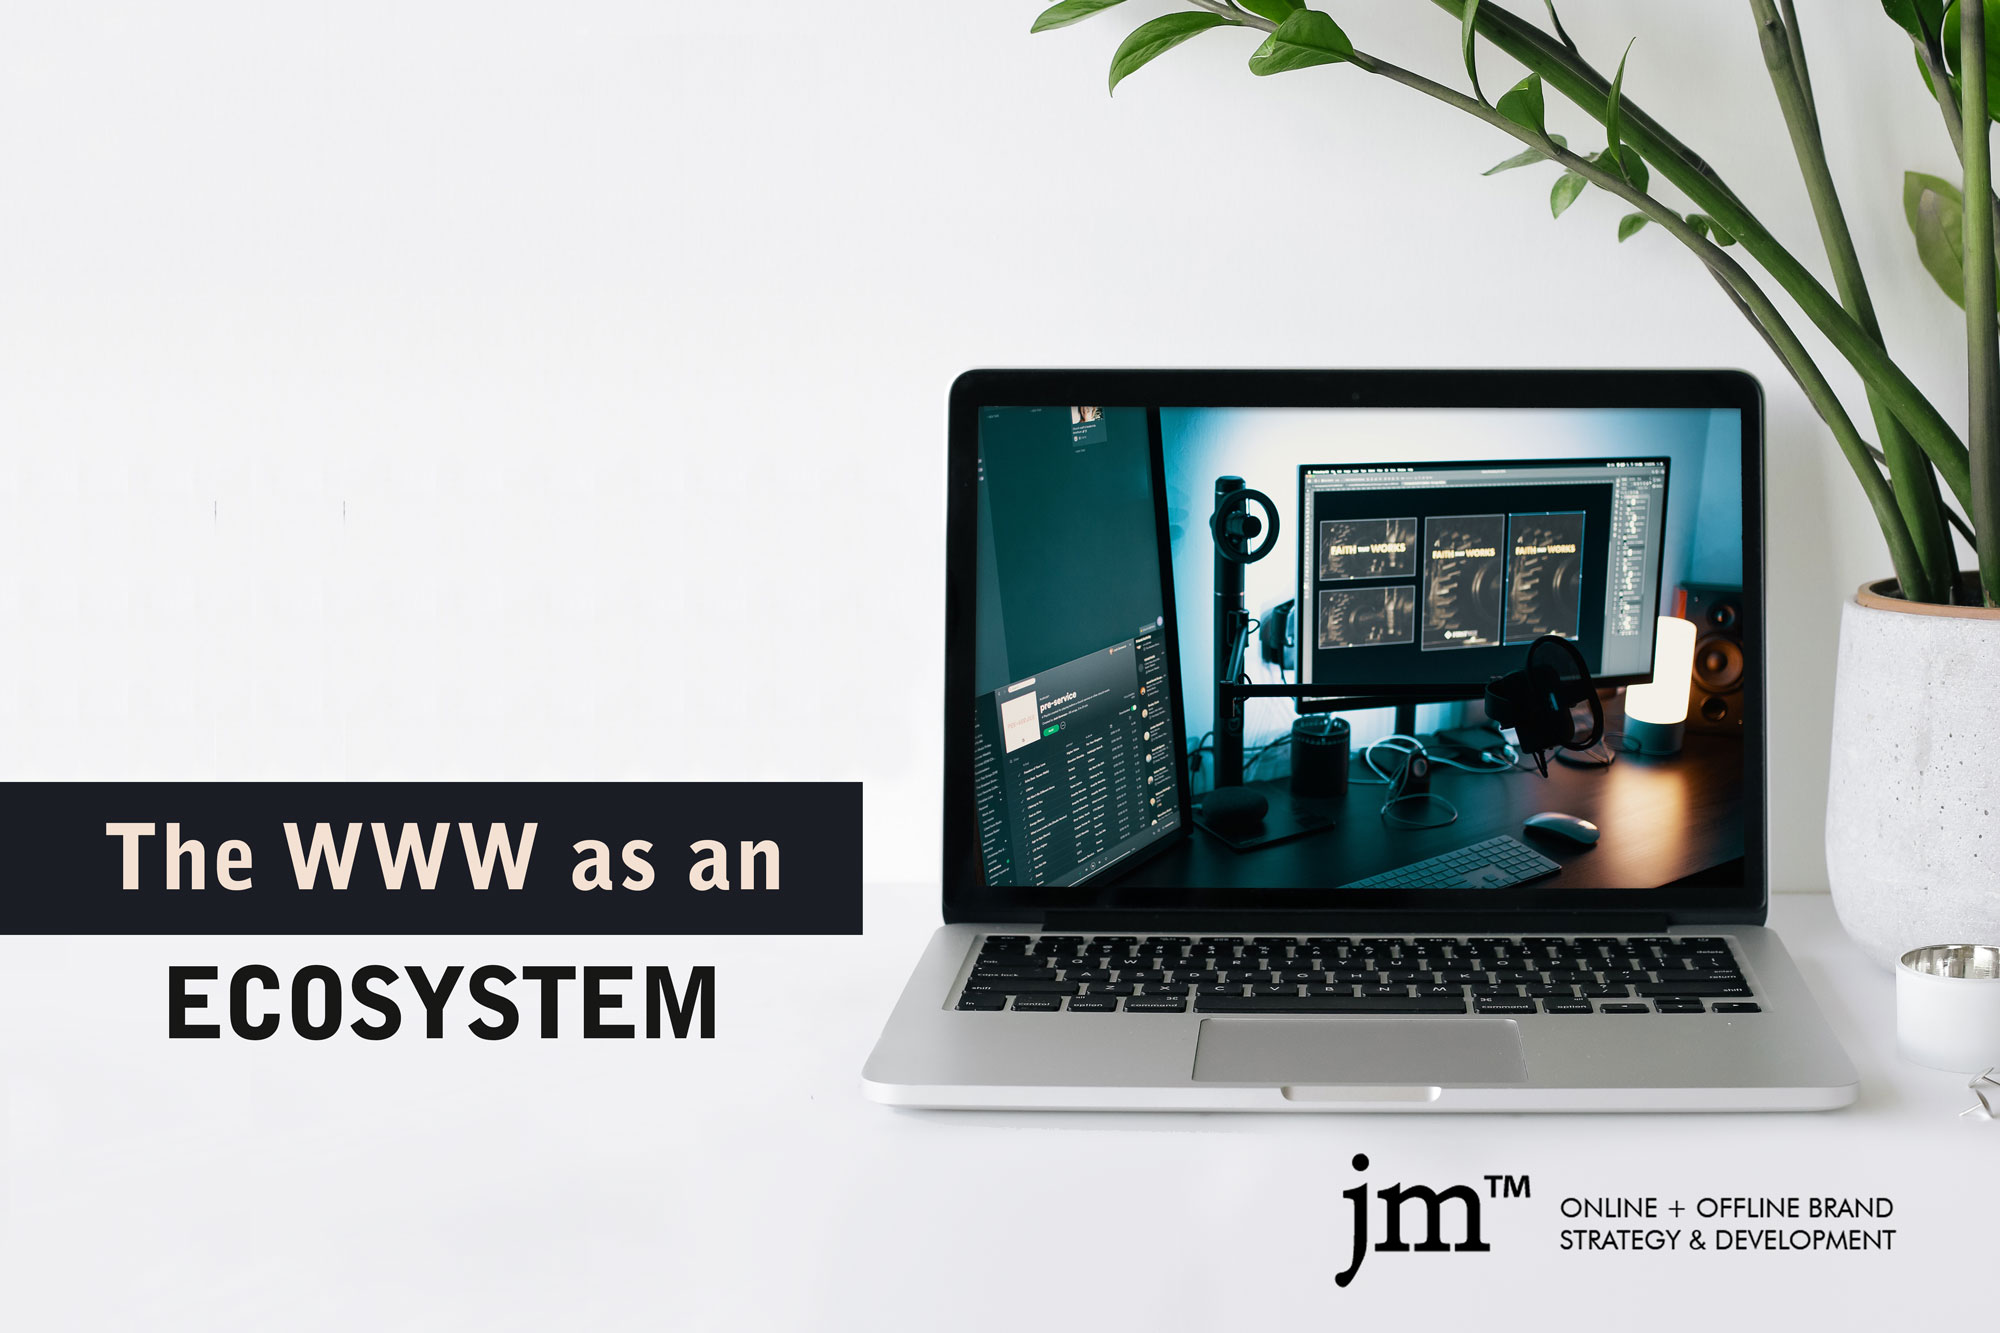 The WWW as an ecosystem